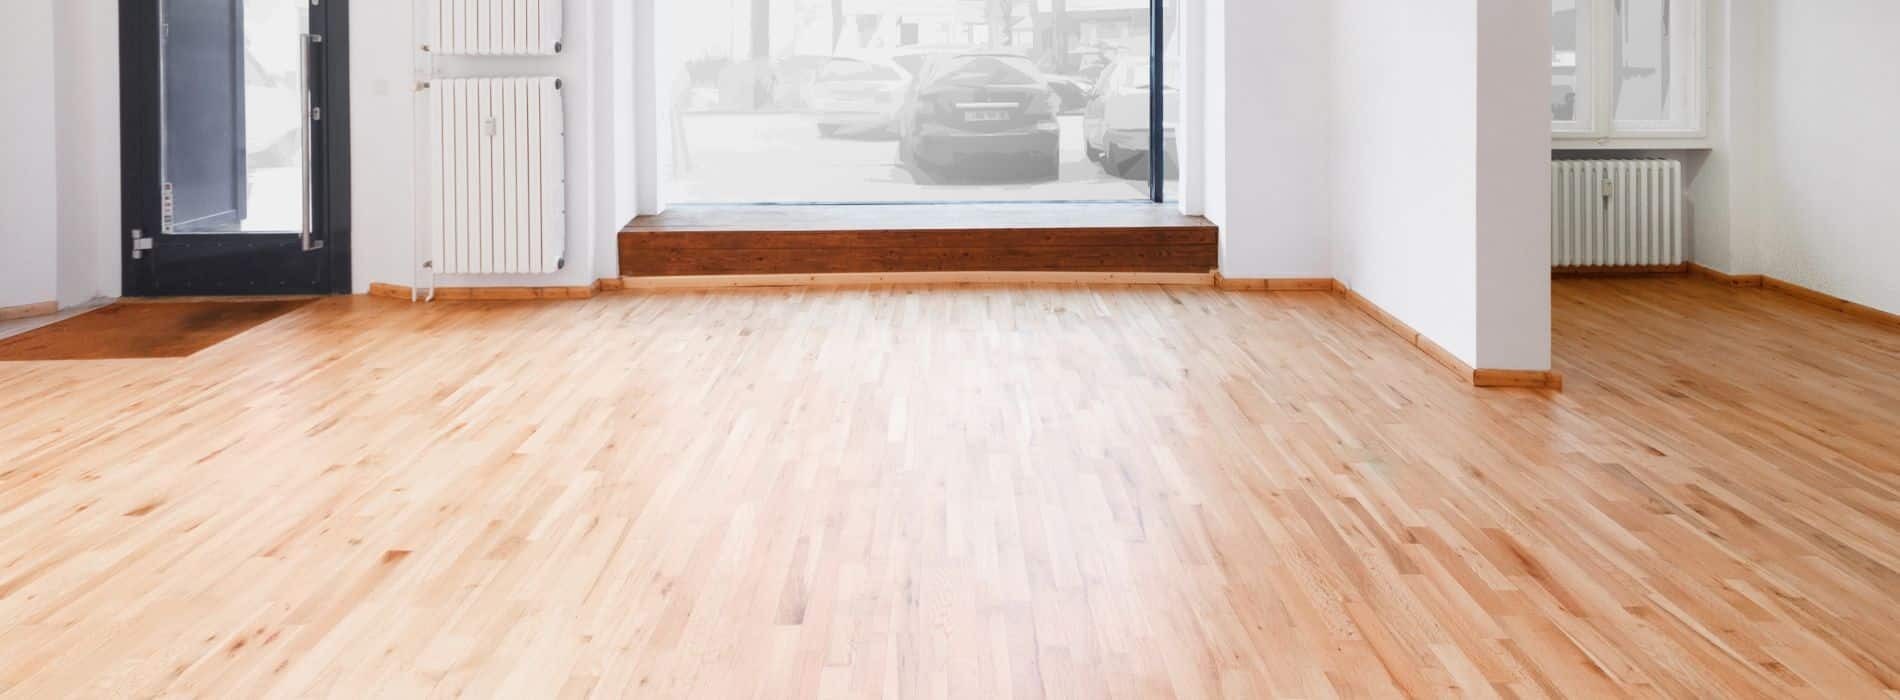 Expertly restored parquet floor in Holloway, N7, with Bona 2K Frost whitewashing & Traffic HD matte lacquer. Durable, stunning finish for long-lasting beauty and timeless appeal.